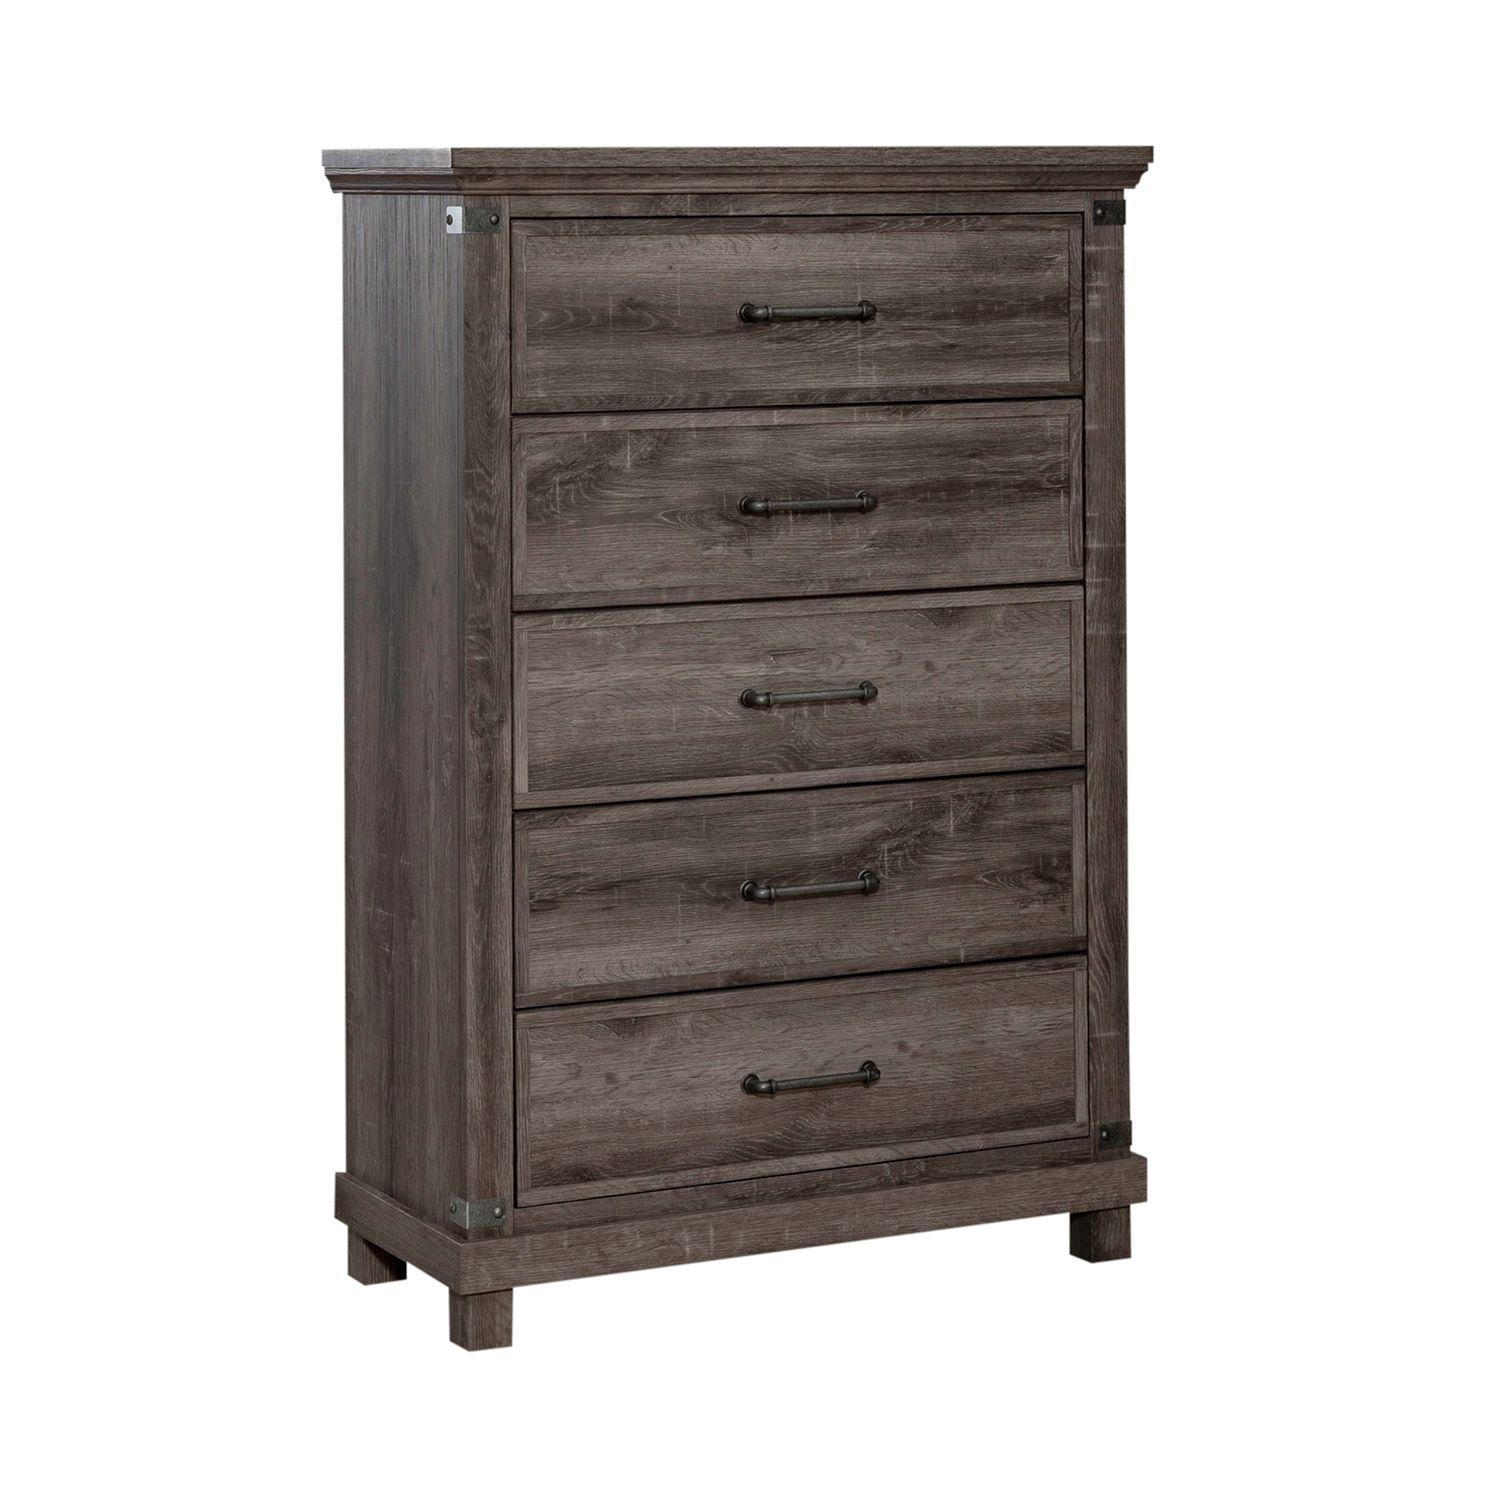 Rustic 5 Drawer Chest Lakeside Haven (903-BR) 903-BR41 in Brown 